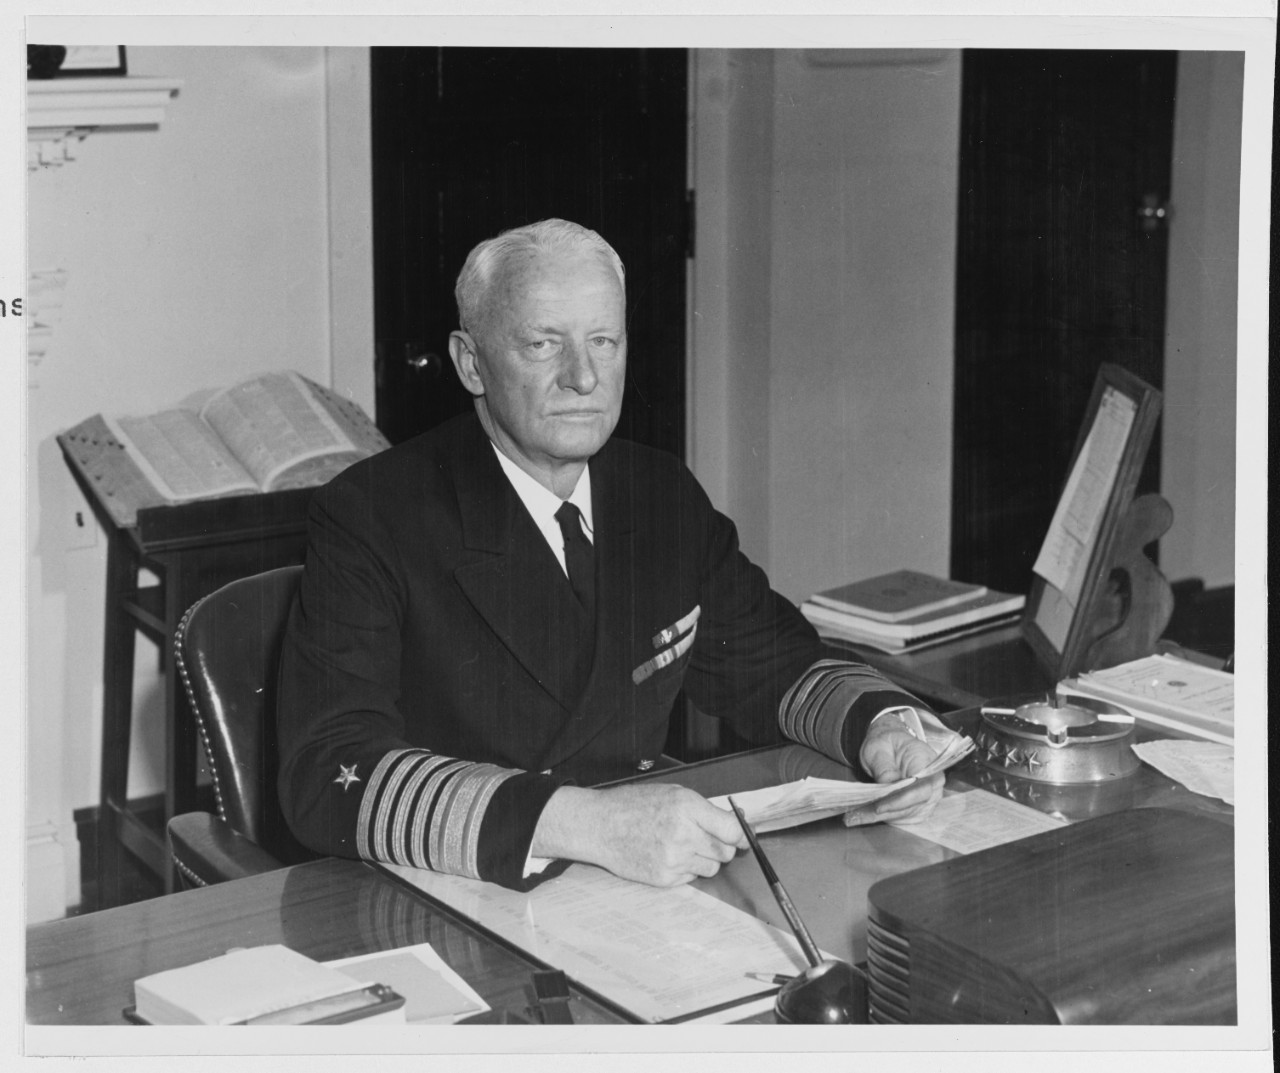 Fleet Admiral Chester W. Nimitz, Chief of Naval Operations